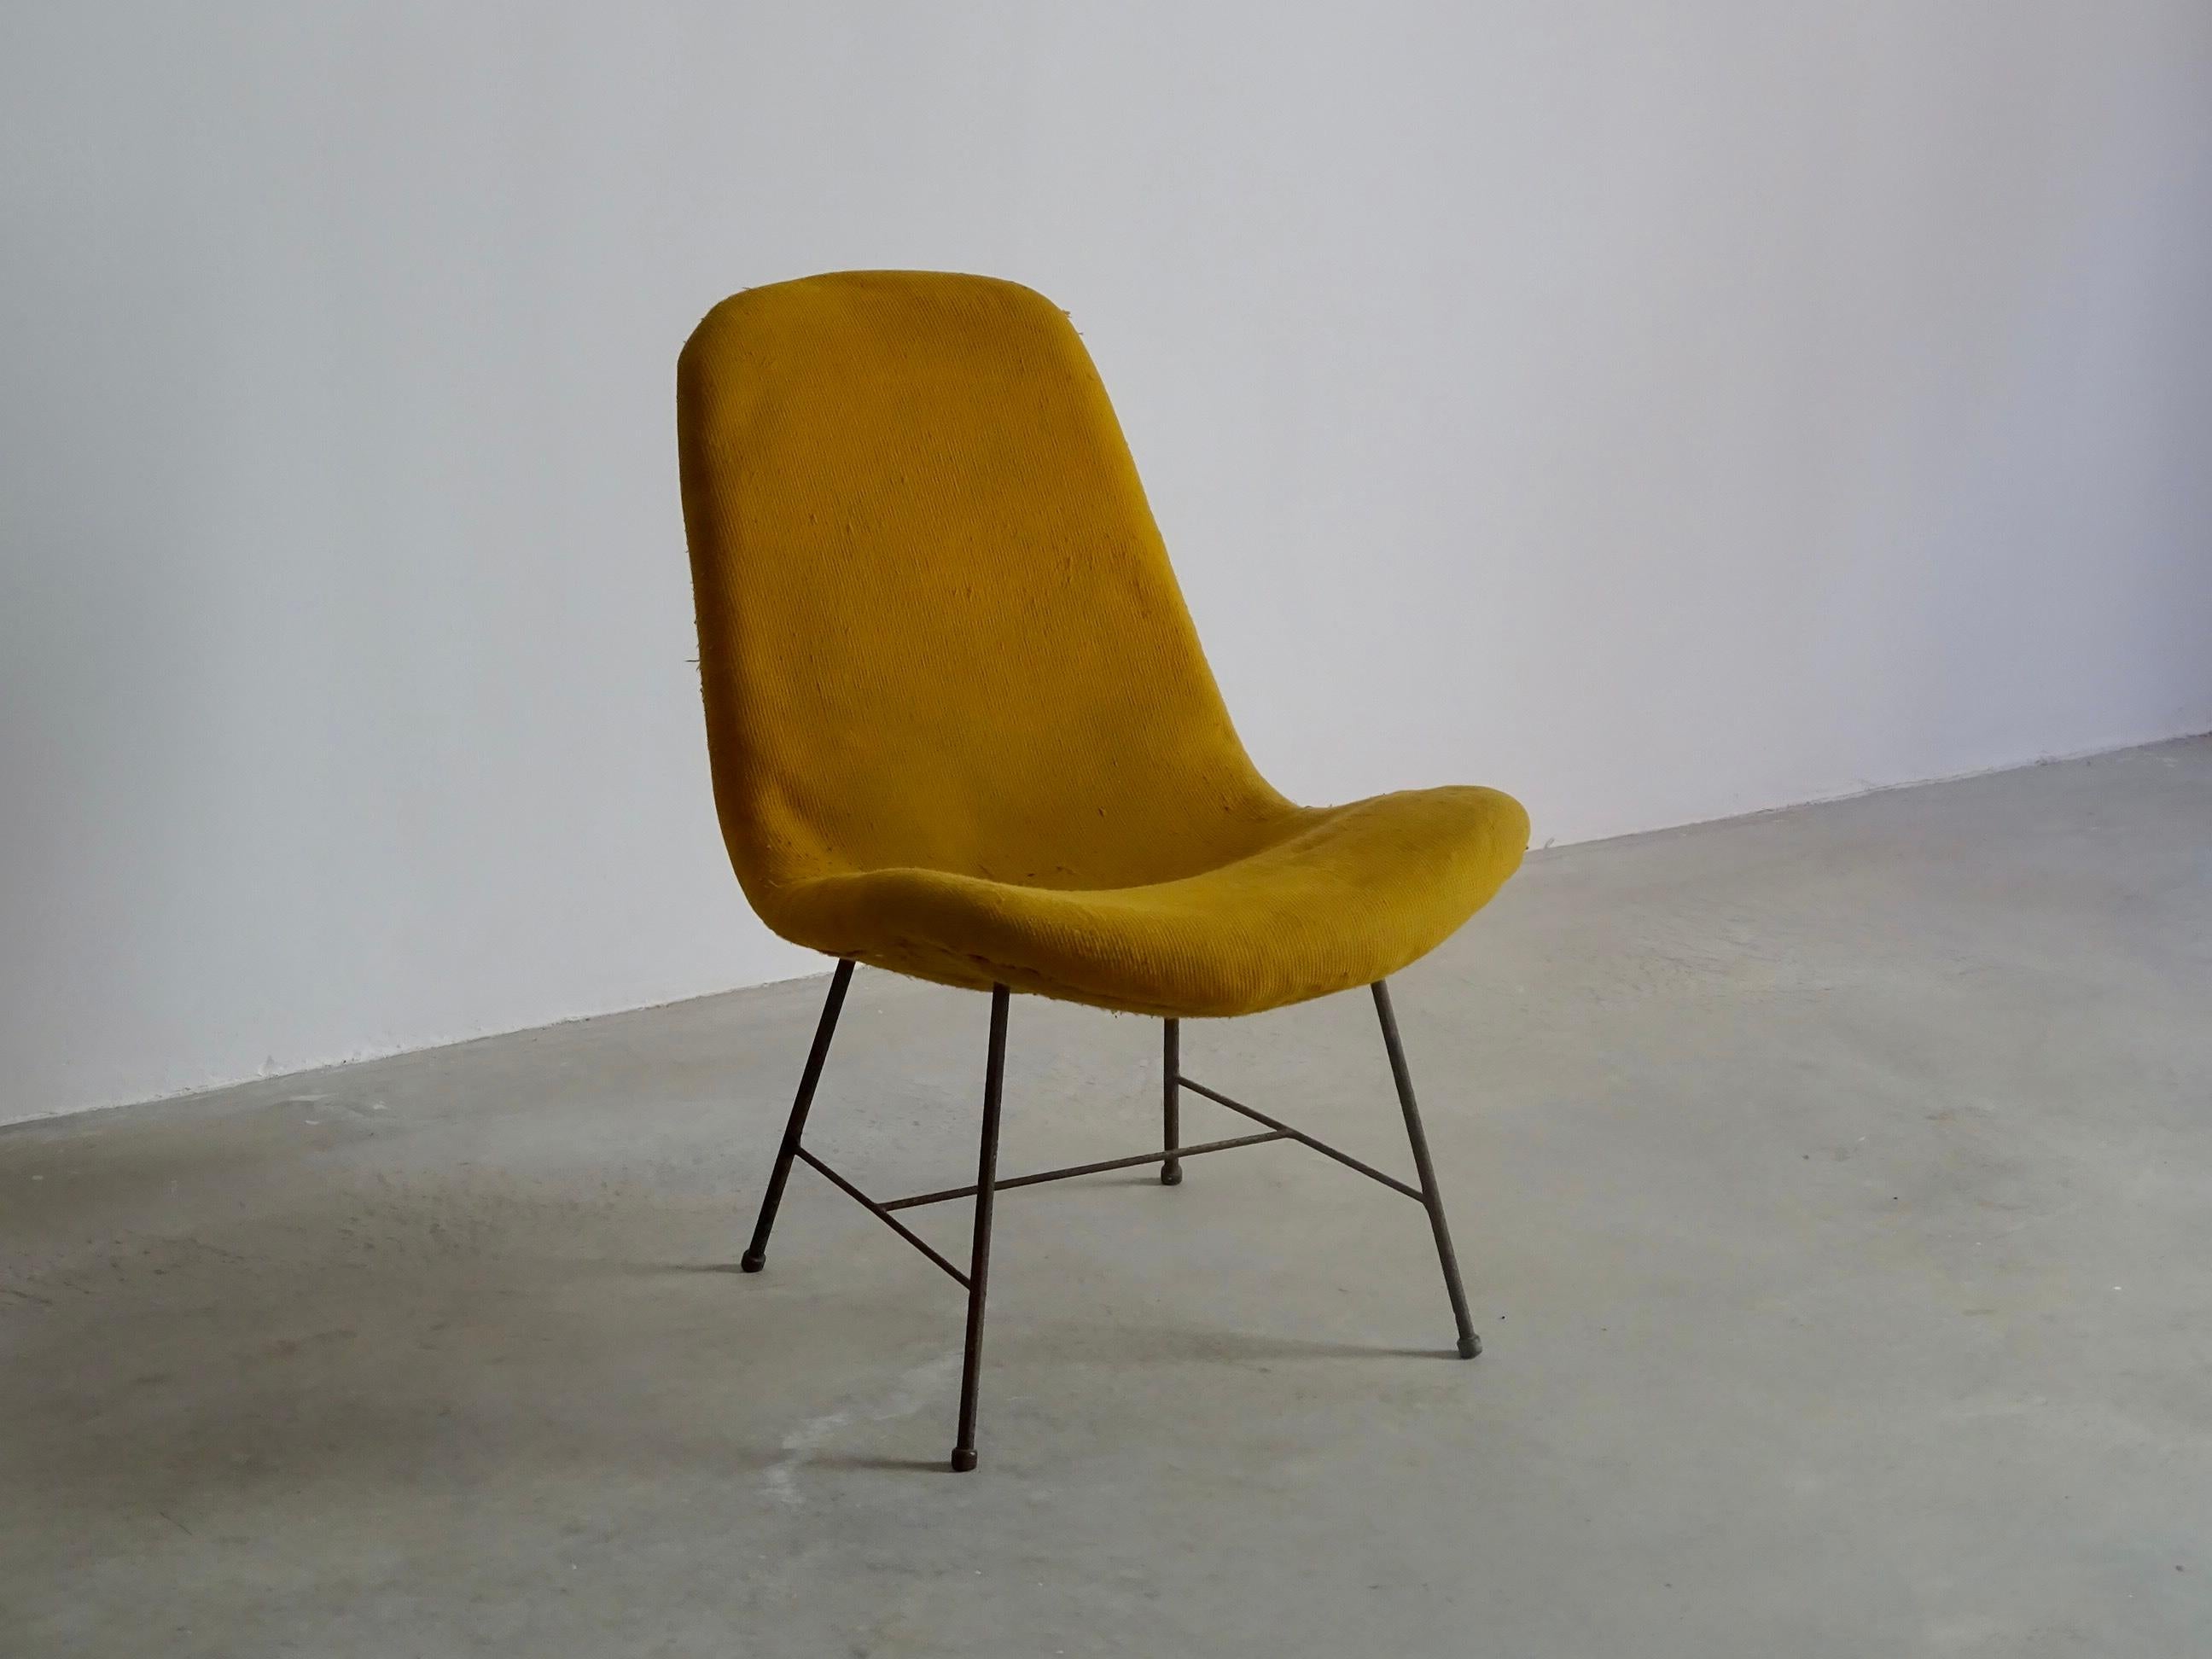 Lounge chair designed by Carlo Hauner, produced by “Móveis Artesanal” around 1954 in São Paulo (Brazil). Original condition, yellow worn fabric as photos show, solid iron structure and brass feet. The chair hasn’t been restored to preserve it in its